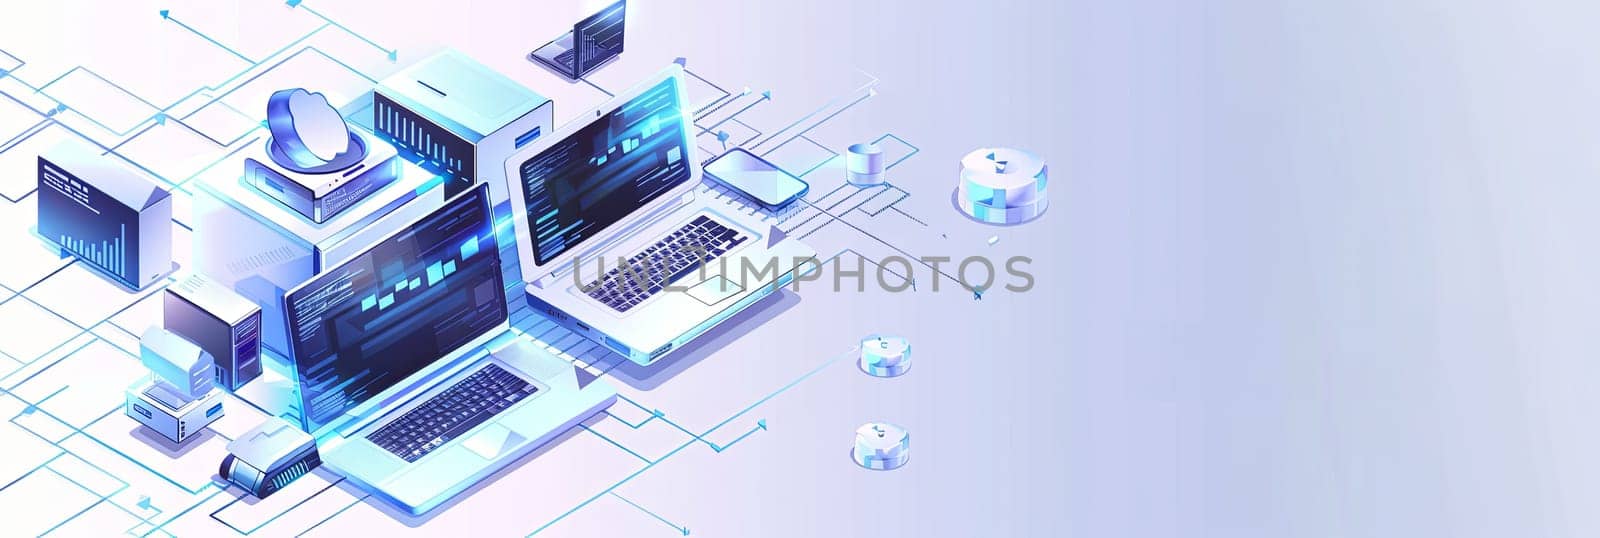 Blue and white abstract background featuring laptops, perfect for computer service and tech repair banners.